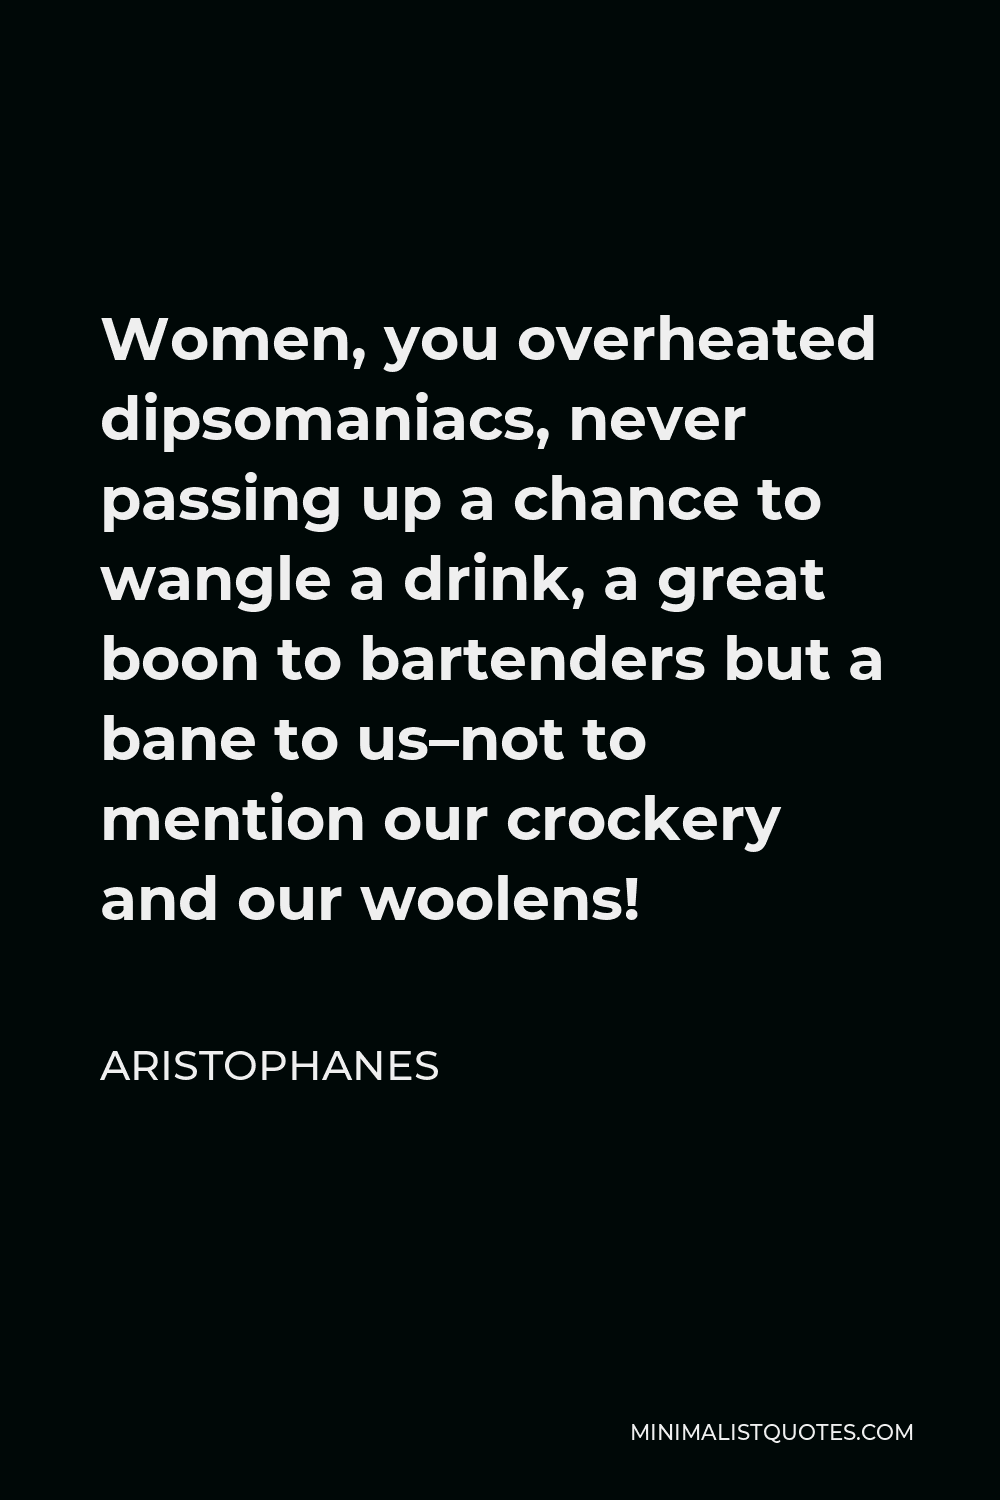 Aristophanes Quote - Women, you overheated dipsomaniacs, never passing up a chance to wangle a drink, a great boon to bartenders but a bane to us–not to mention our crockery and our woolens!